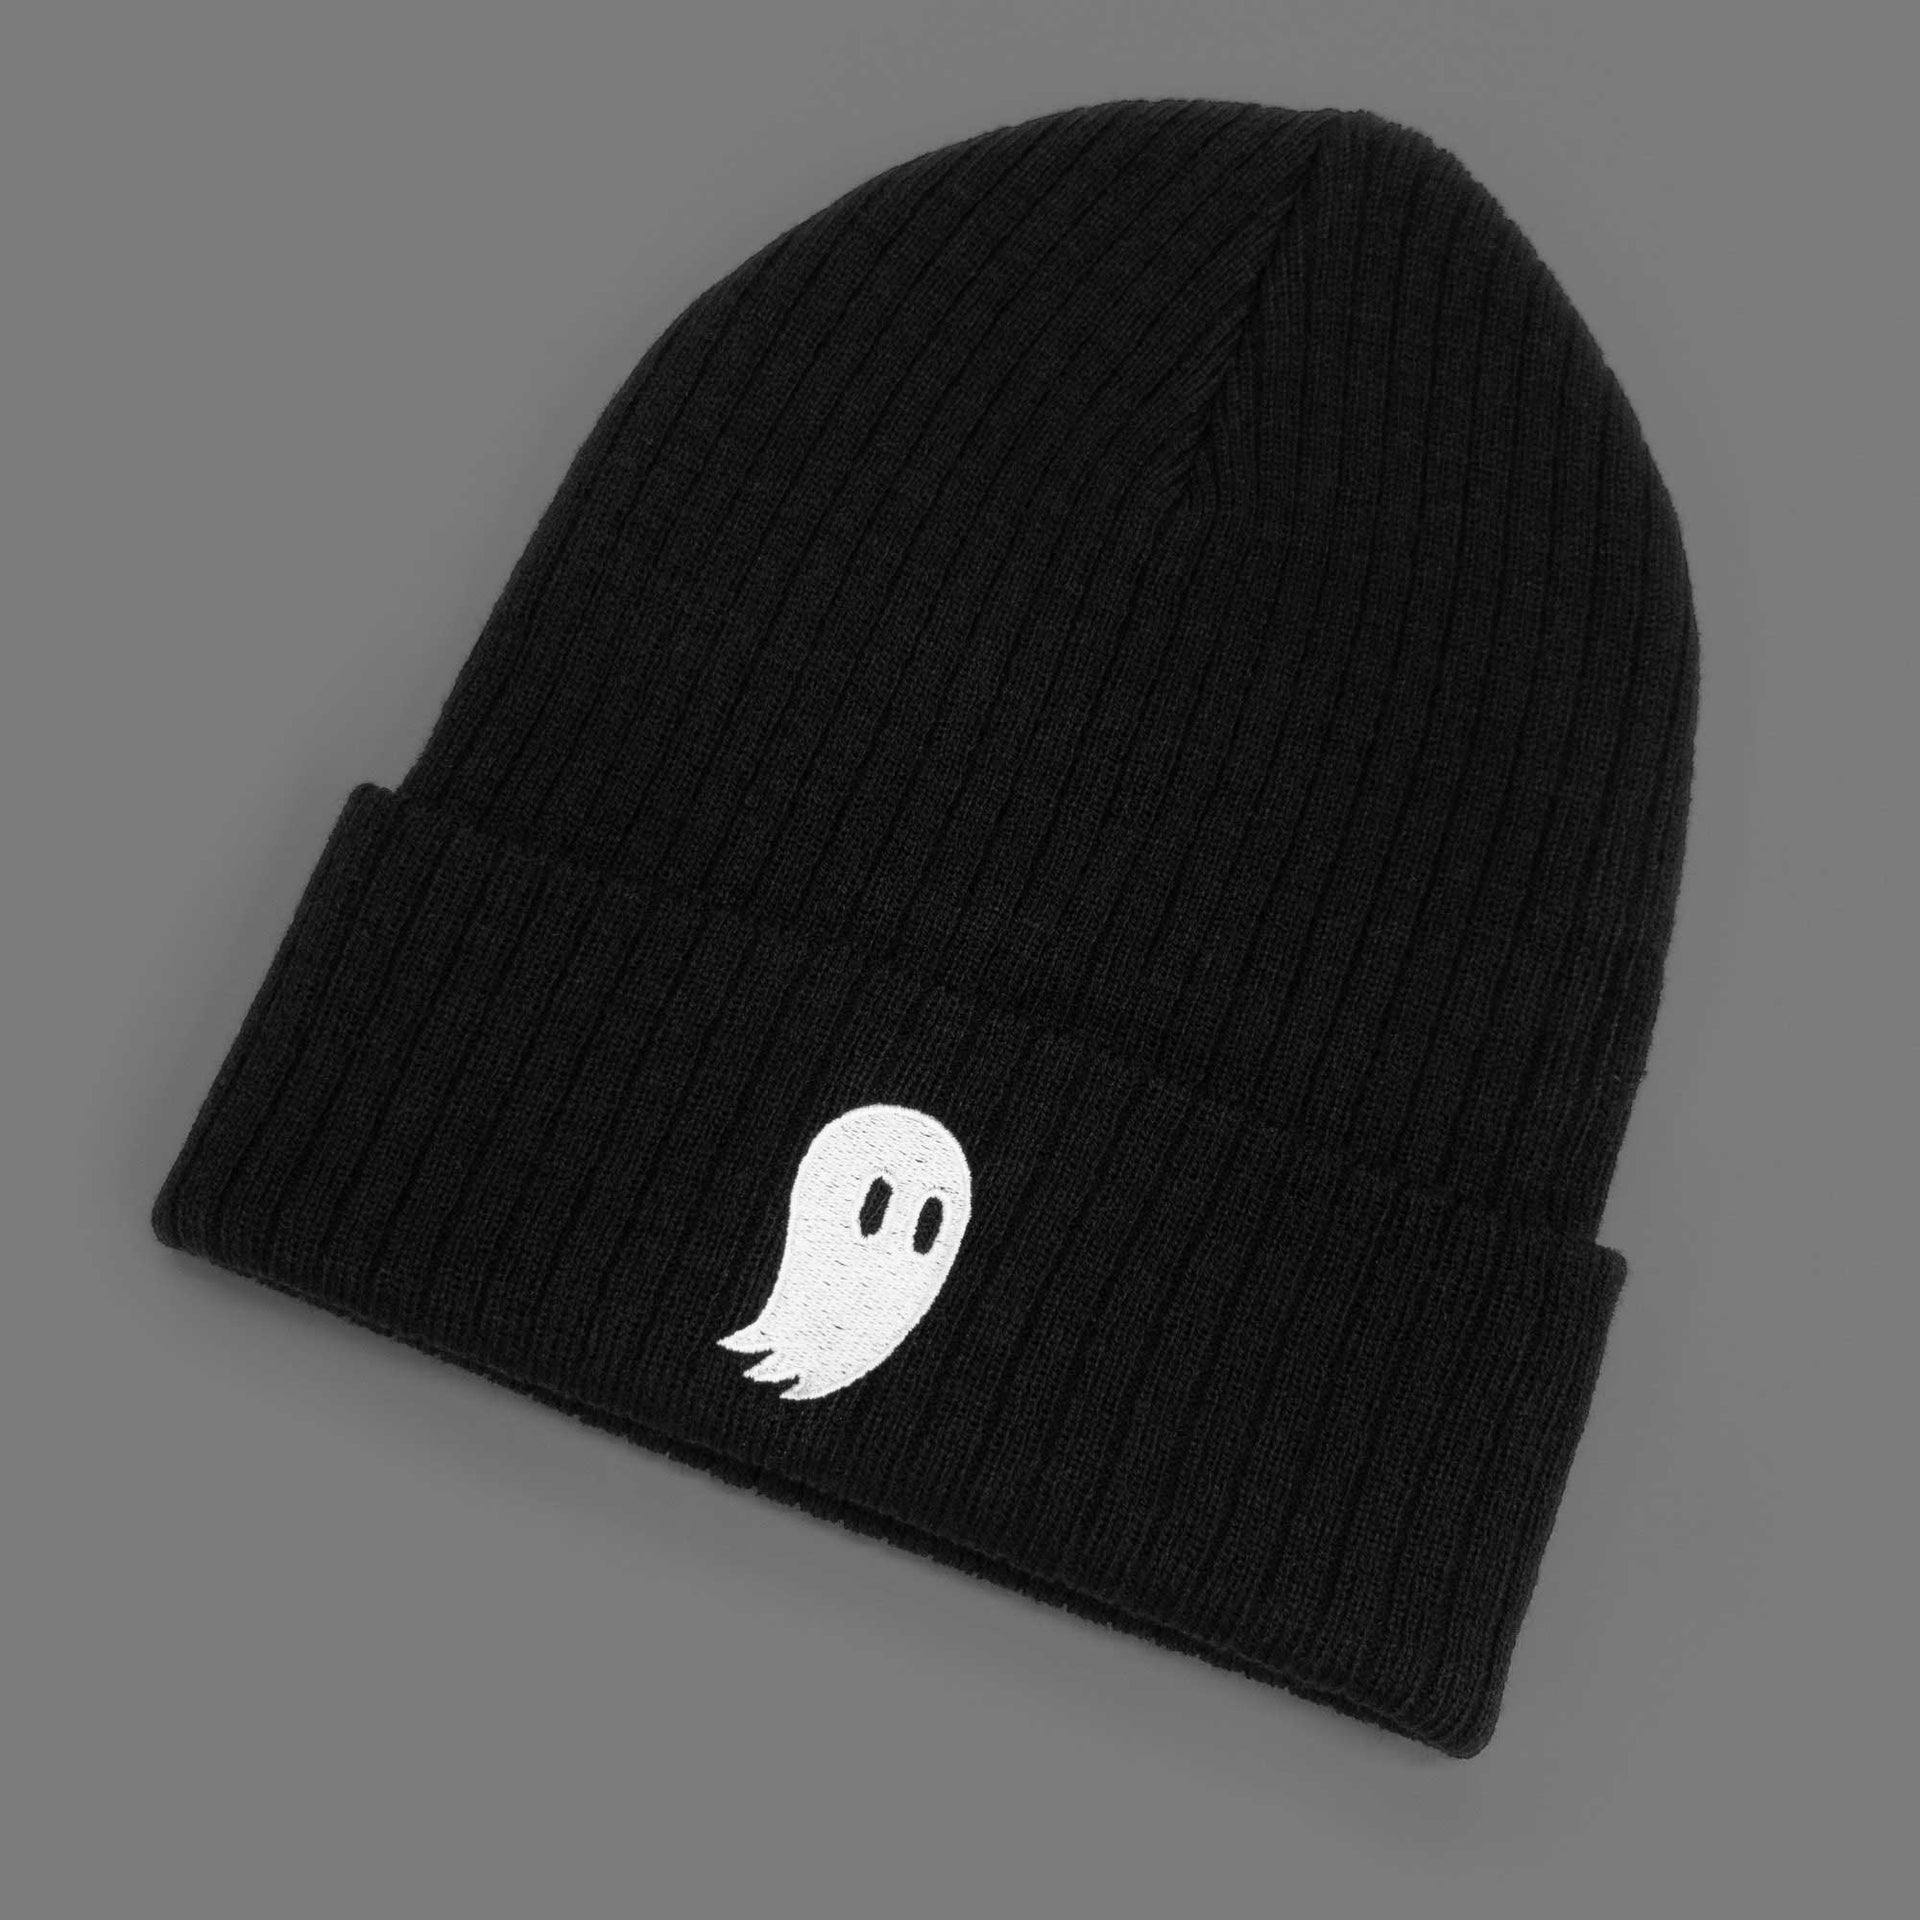 a white ghost embroidered on soft black beanie